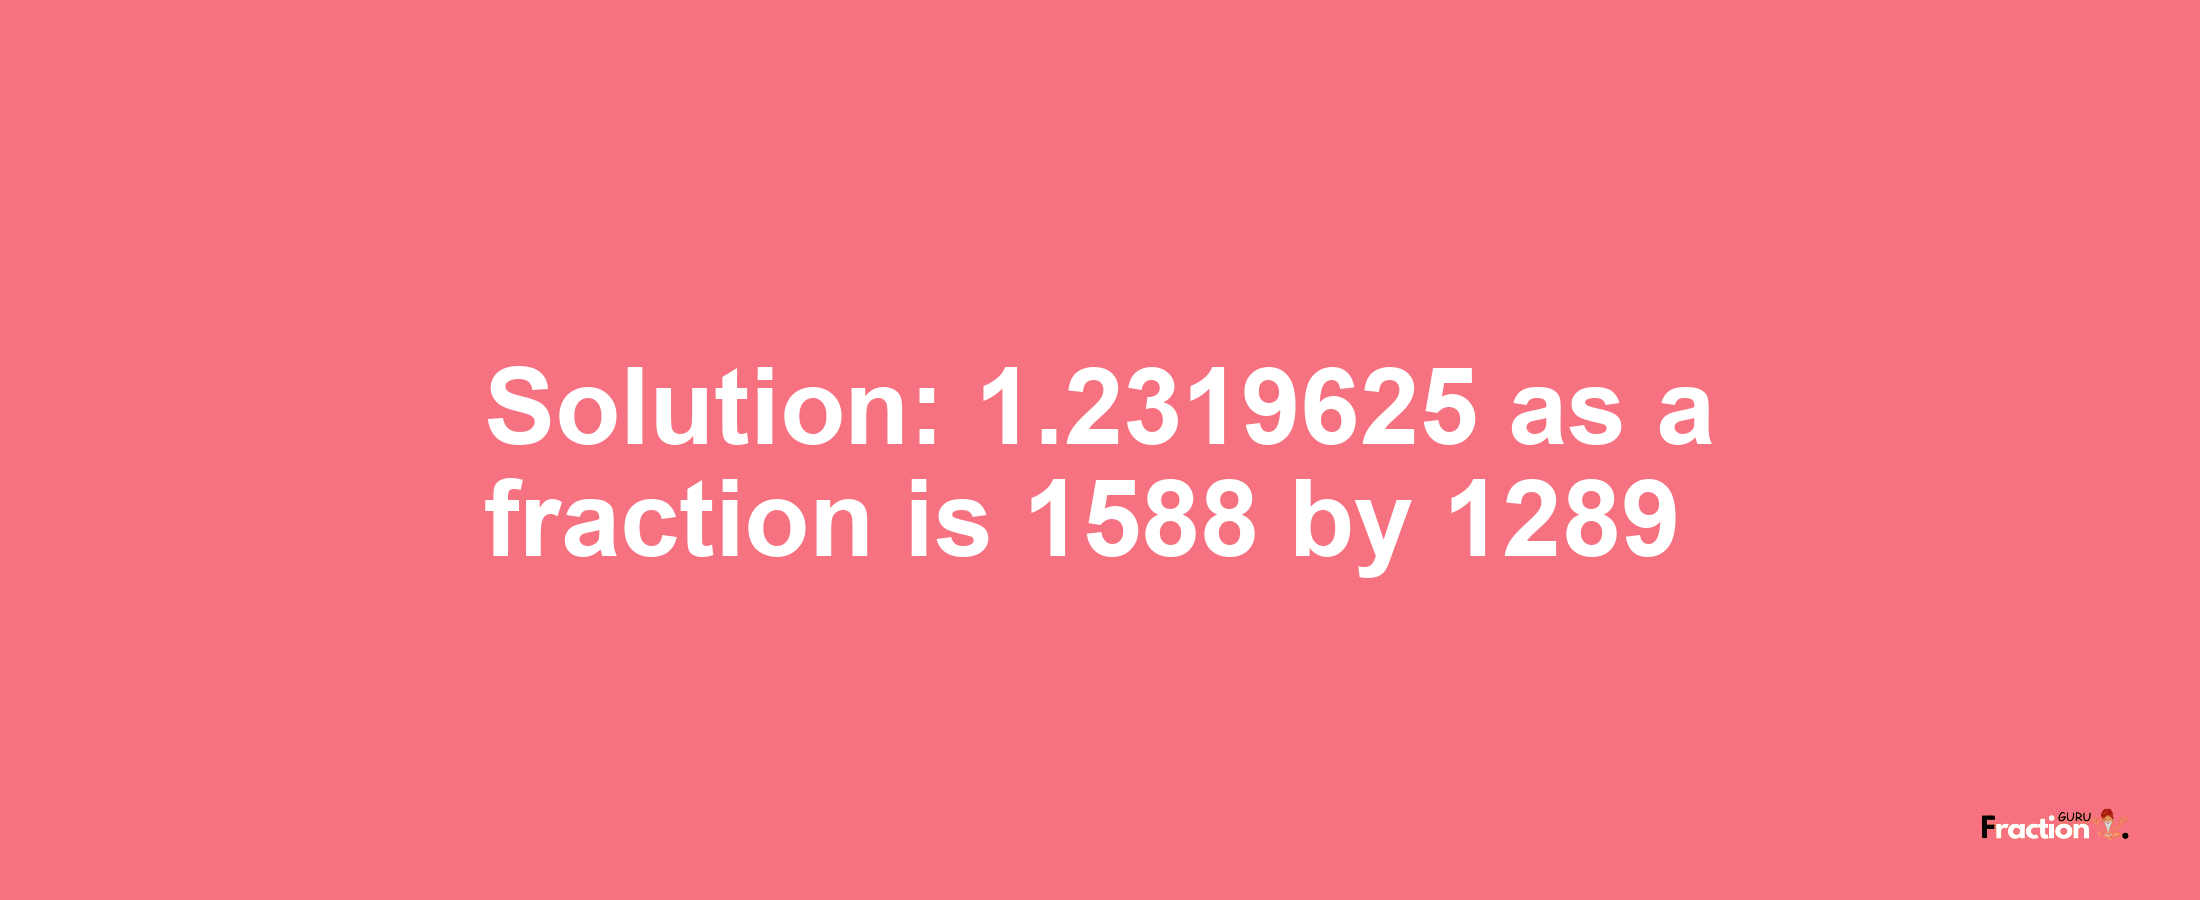 Solution:1.2319625 as a fraction is 1588/1289